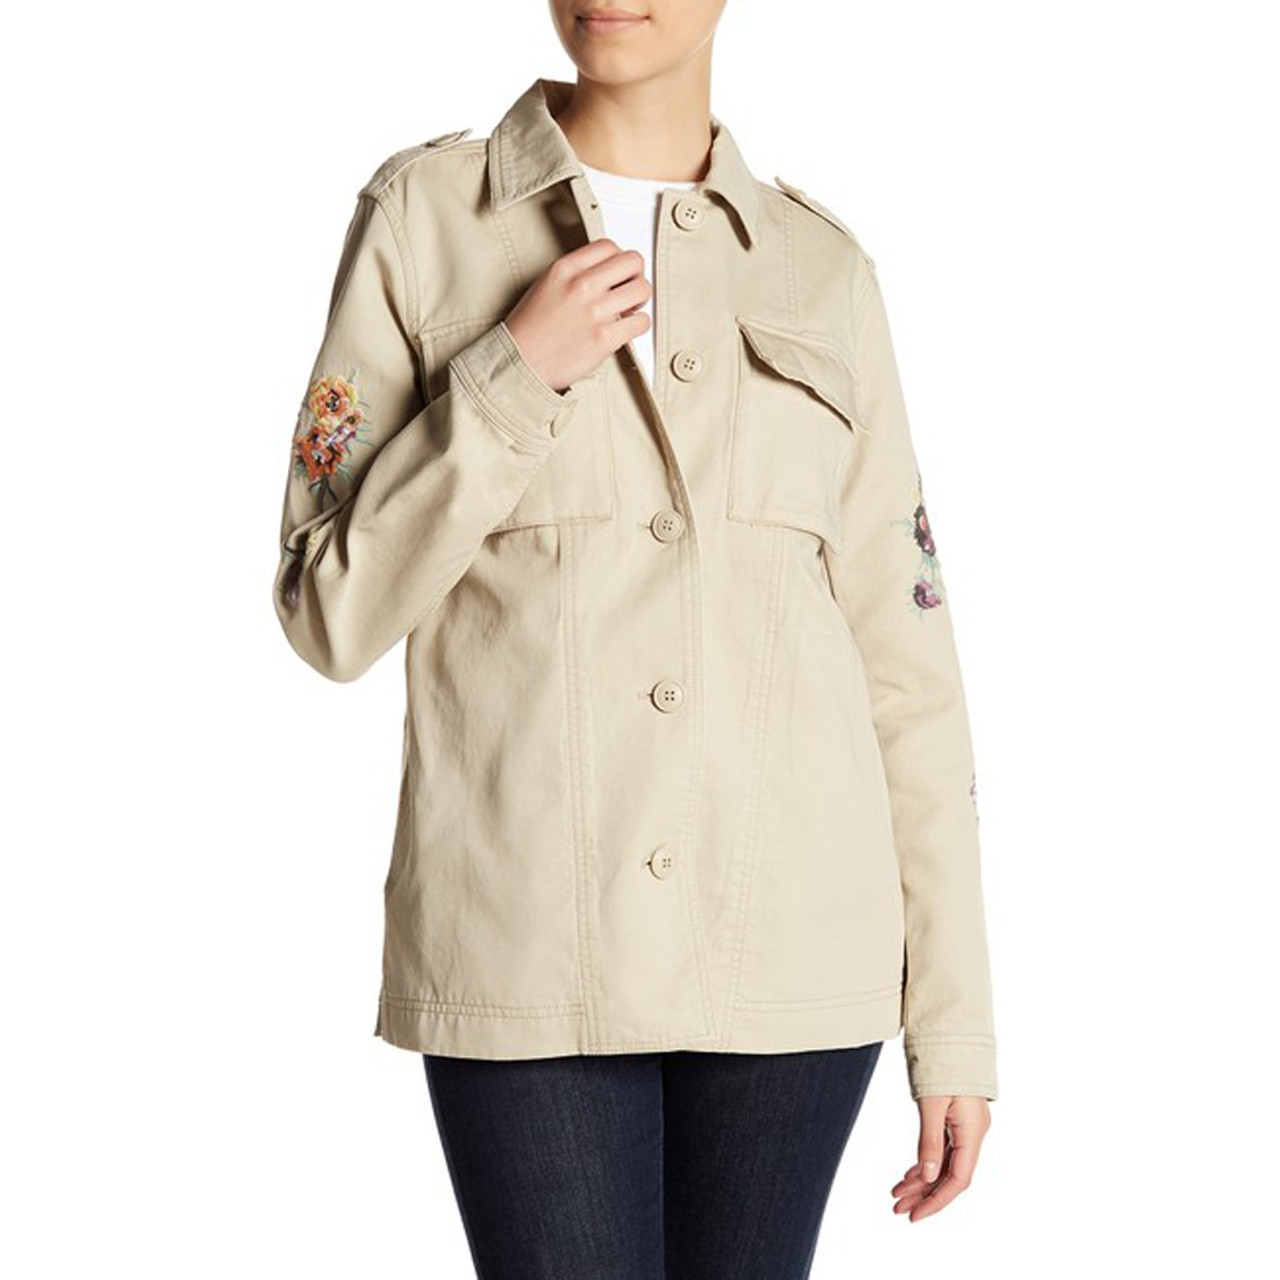 Levi's Embroidered Sleeve Jacket, Sand, Medium - Discount Scrubs and Fashion